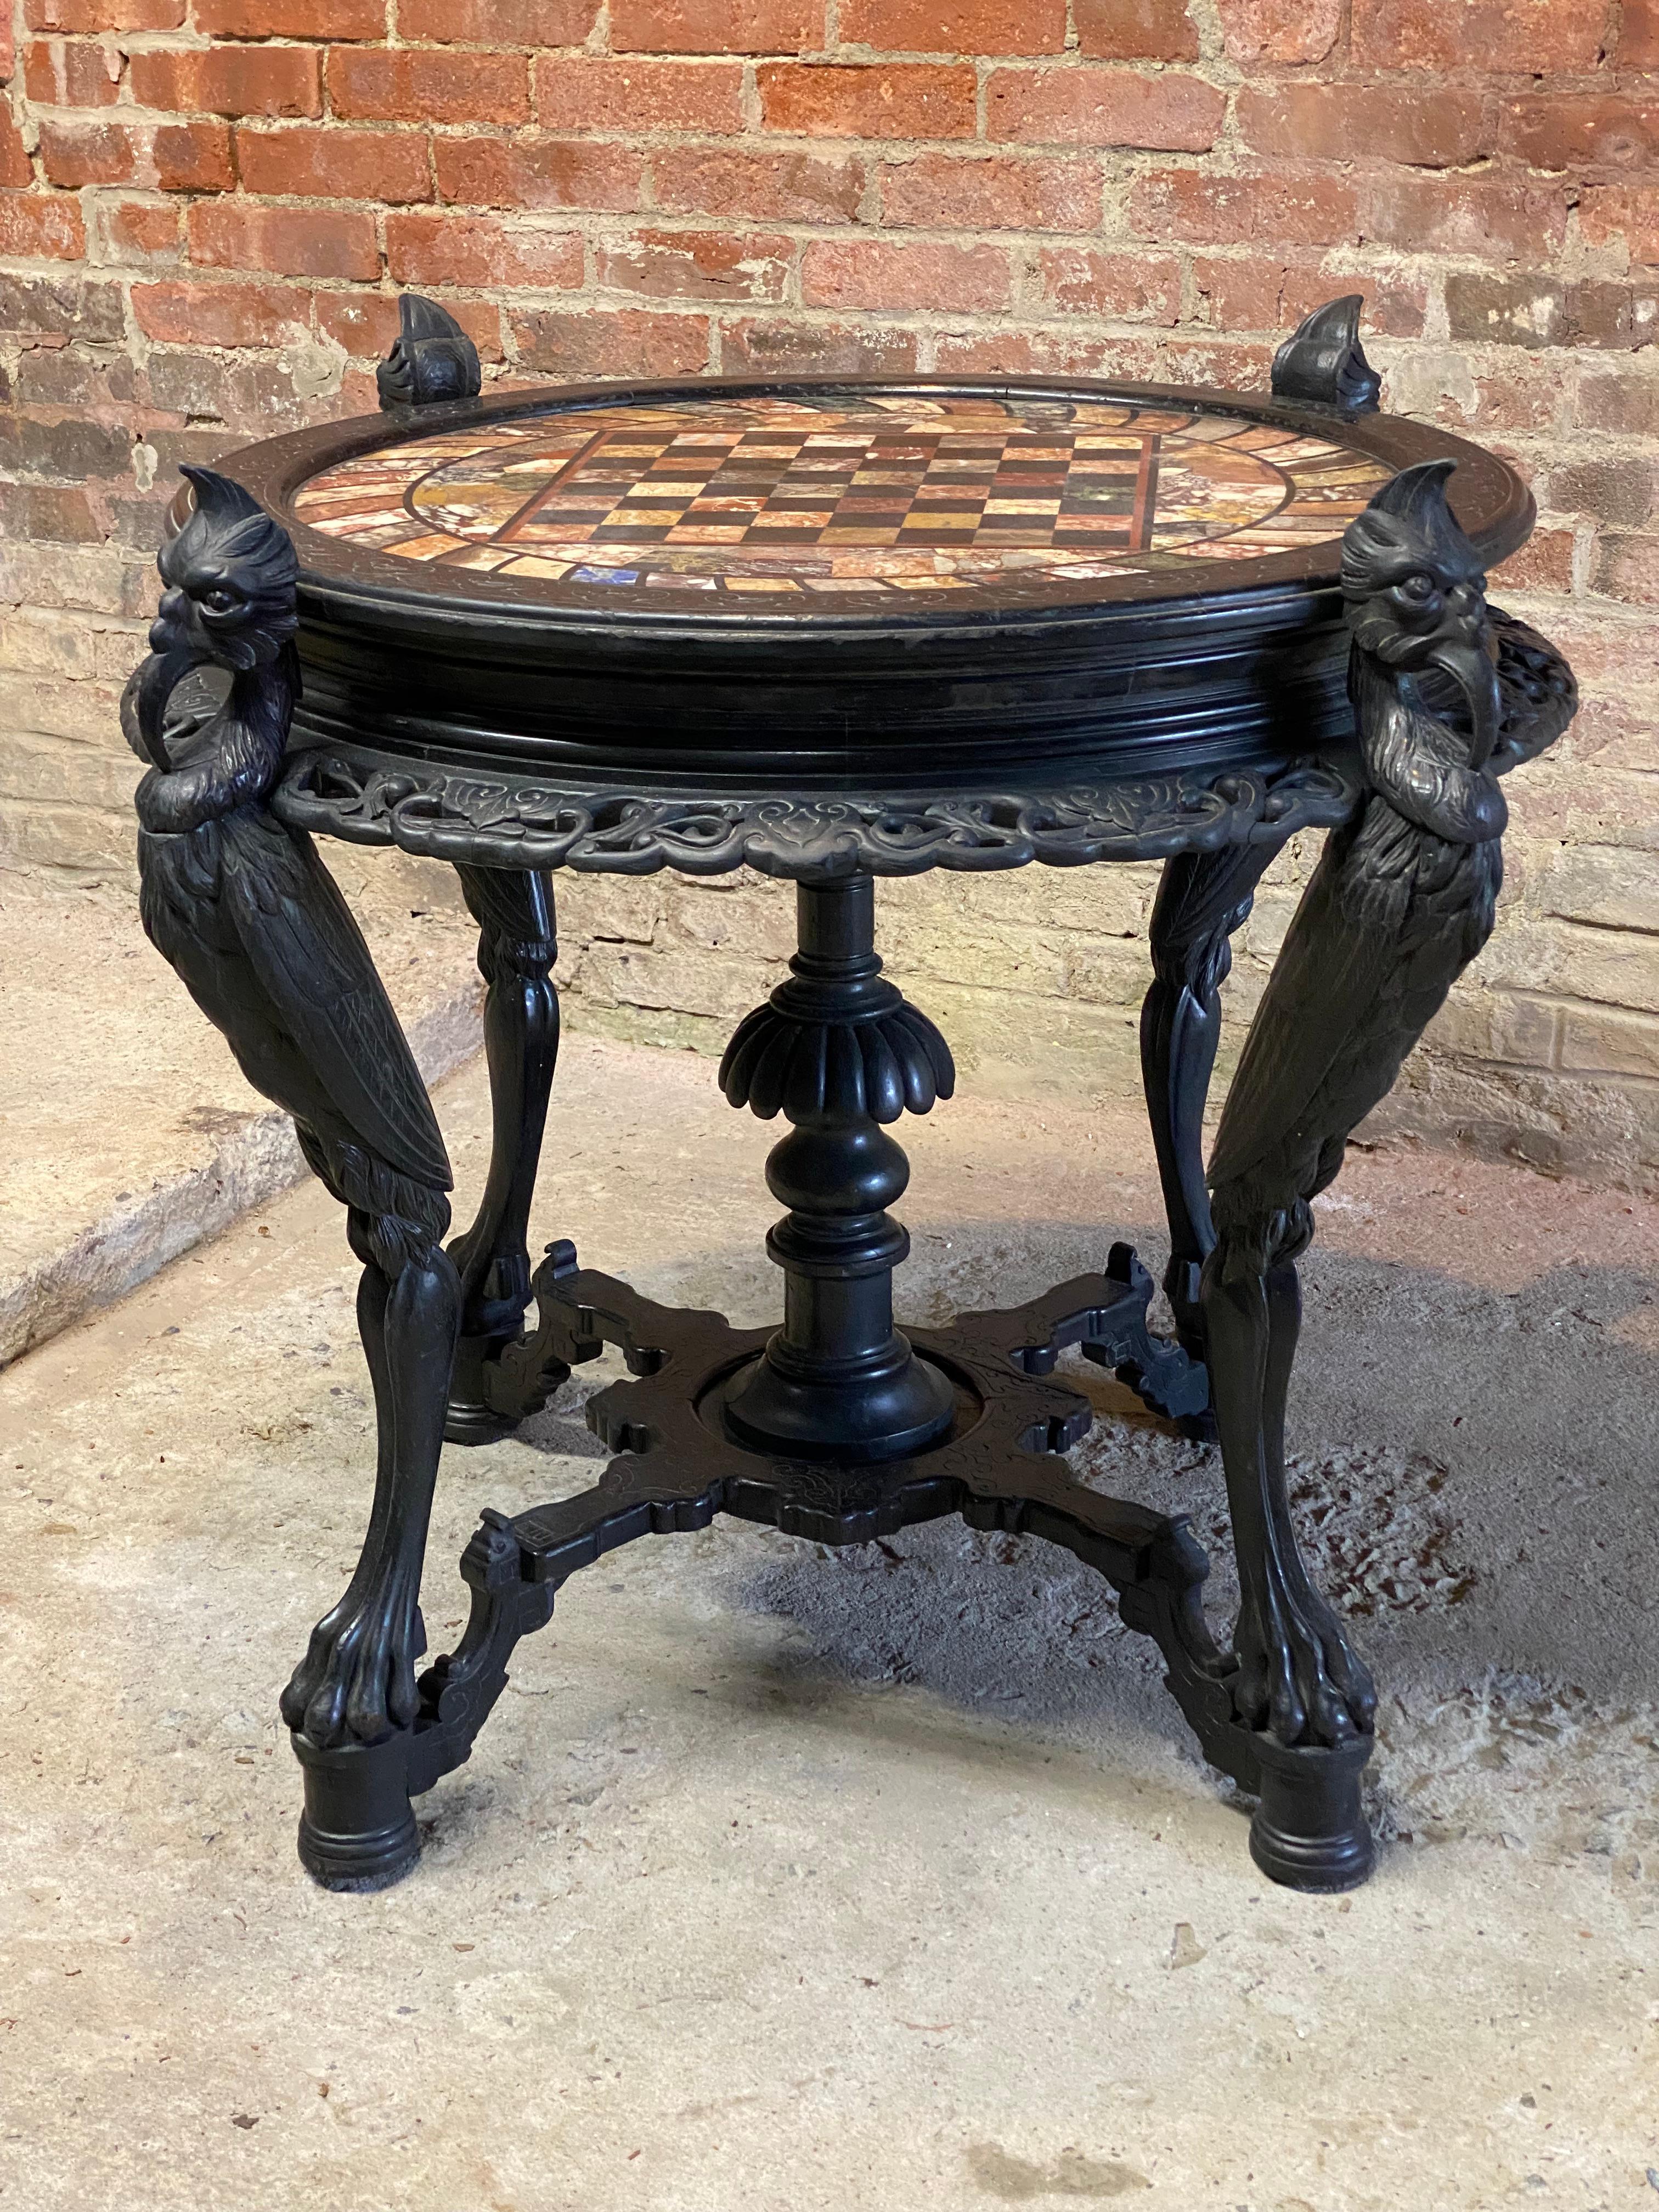 Outstanding ebonized specimen top chess table. This one of a kind find has all the bells and whistles of the ultimate luxury game table. Featuring the spectacular marble and semi-precious stone inlaid specimen chess board top, four carved feathered